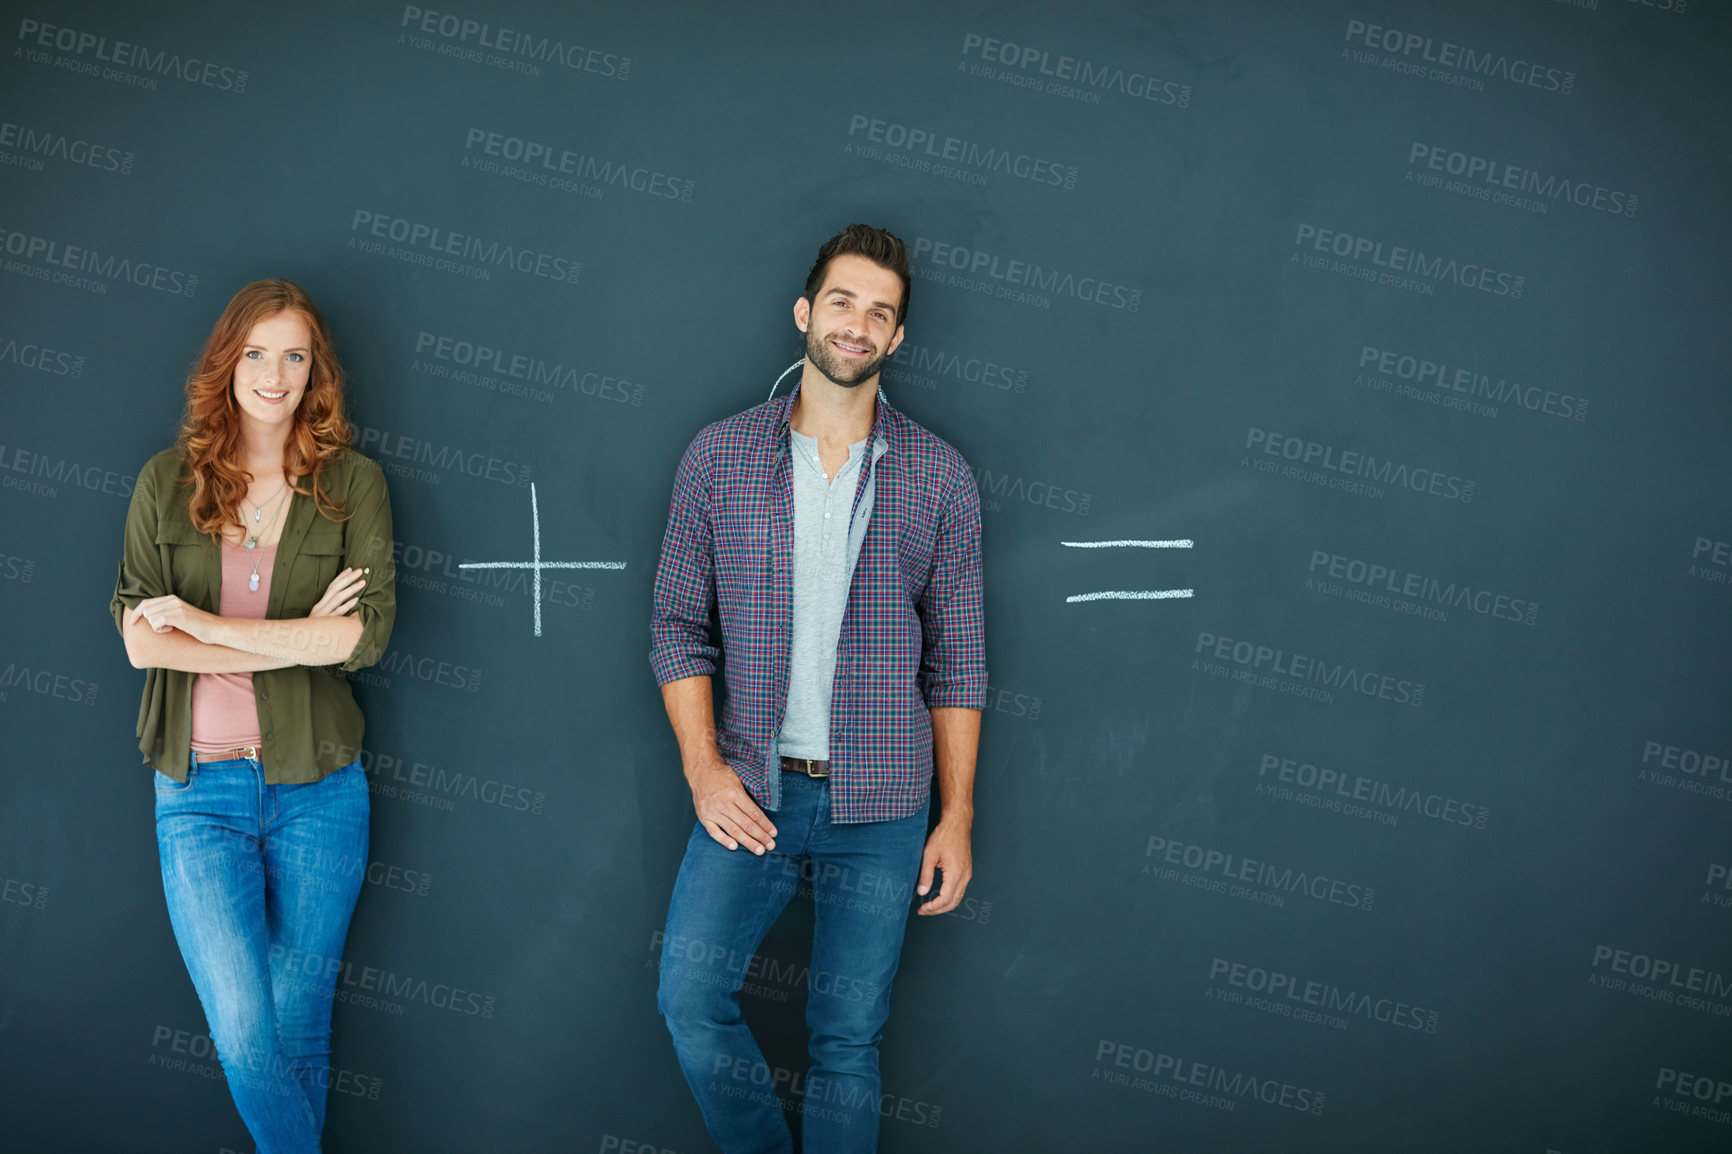 Buy stock photo Shot of a young couple standing in front of a blackboard with symbols written on it